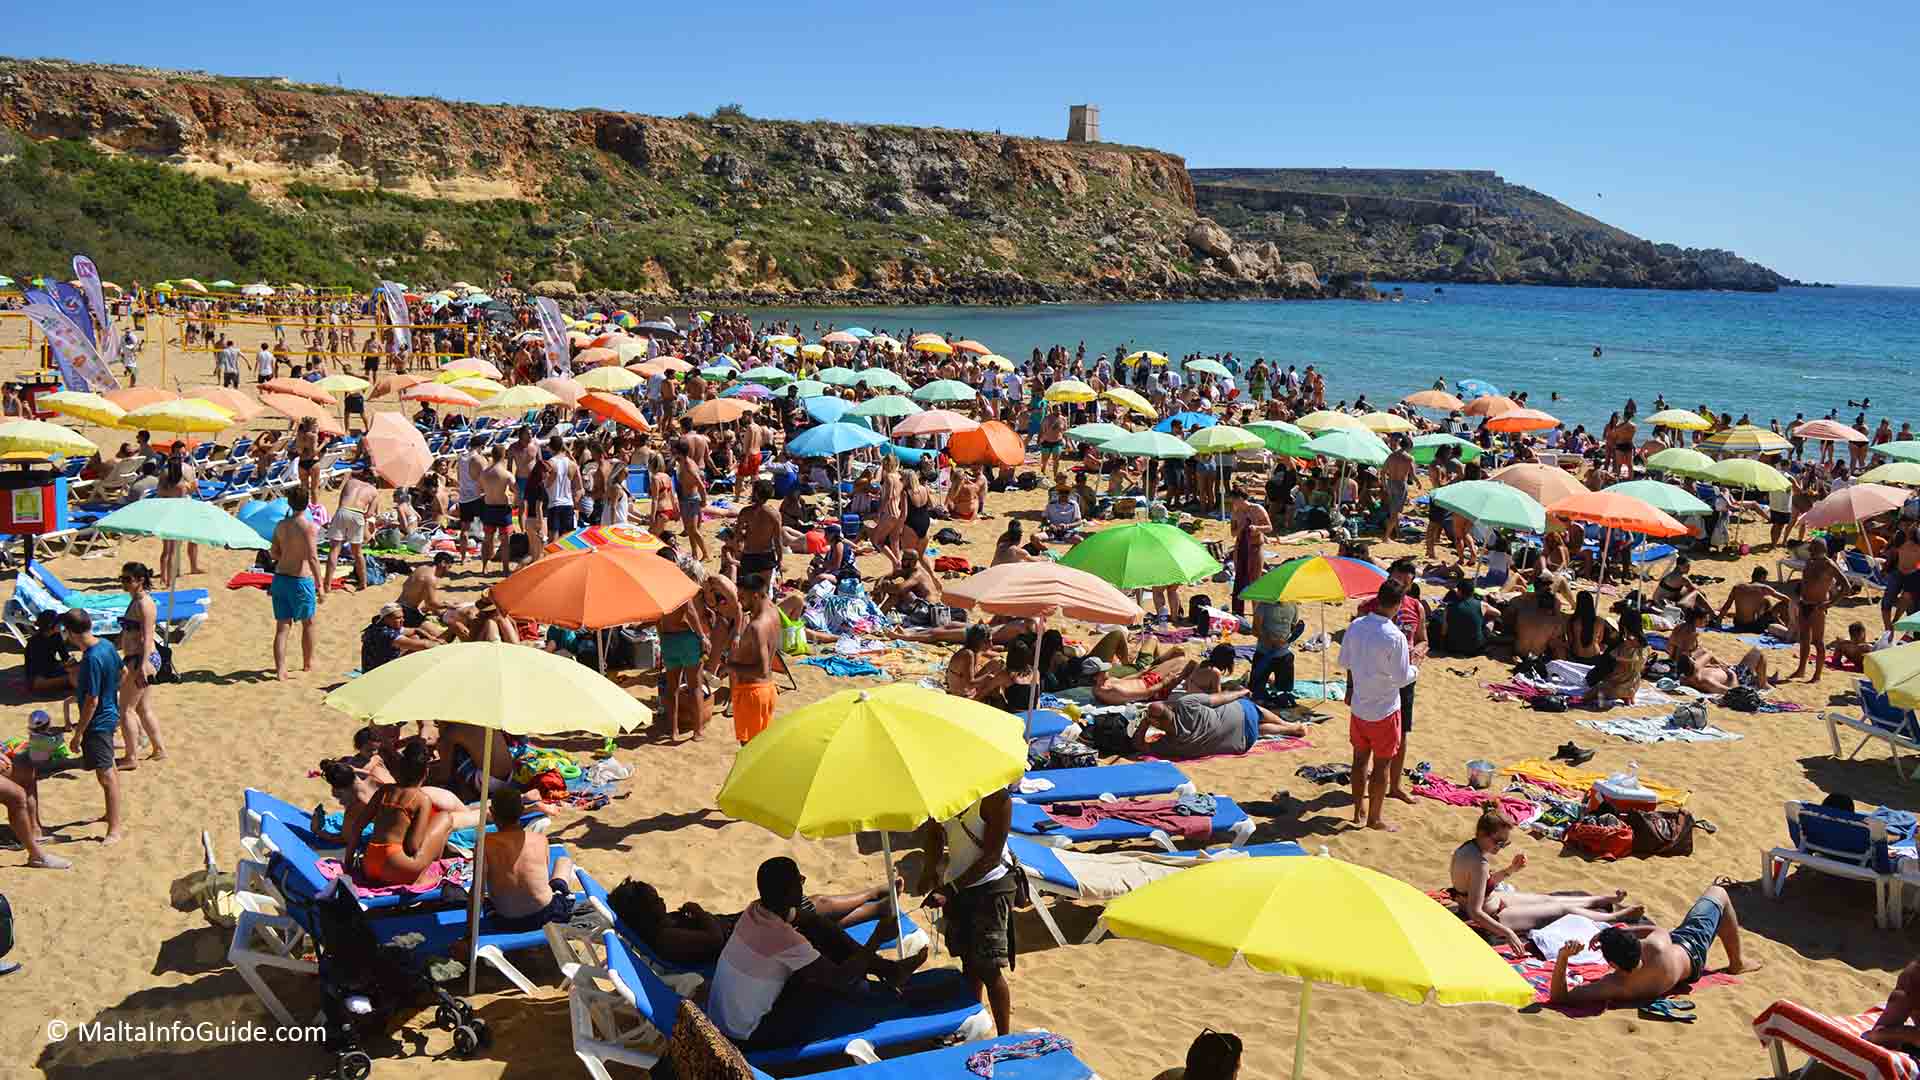 People sunbathing at Golden Bay. One of Malta's Blue flag beaches.